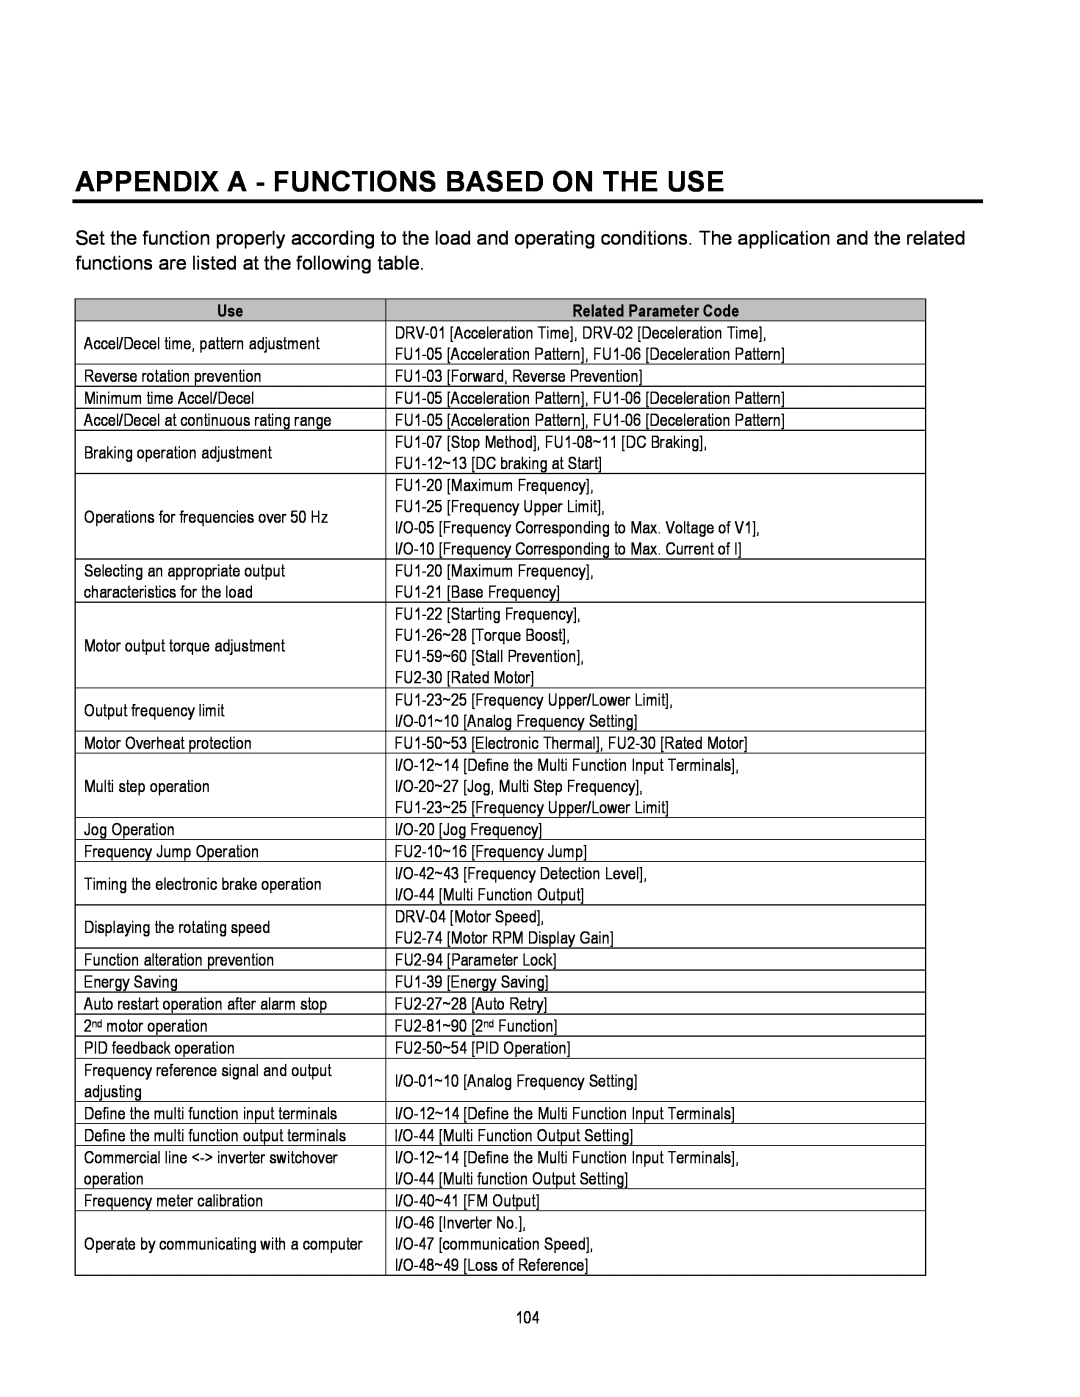 Cleveland Range inverter manual Appendix A - Functions Based On The Use, Related Parameter Code 